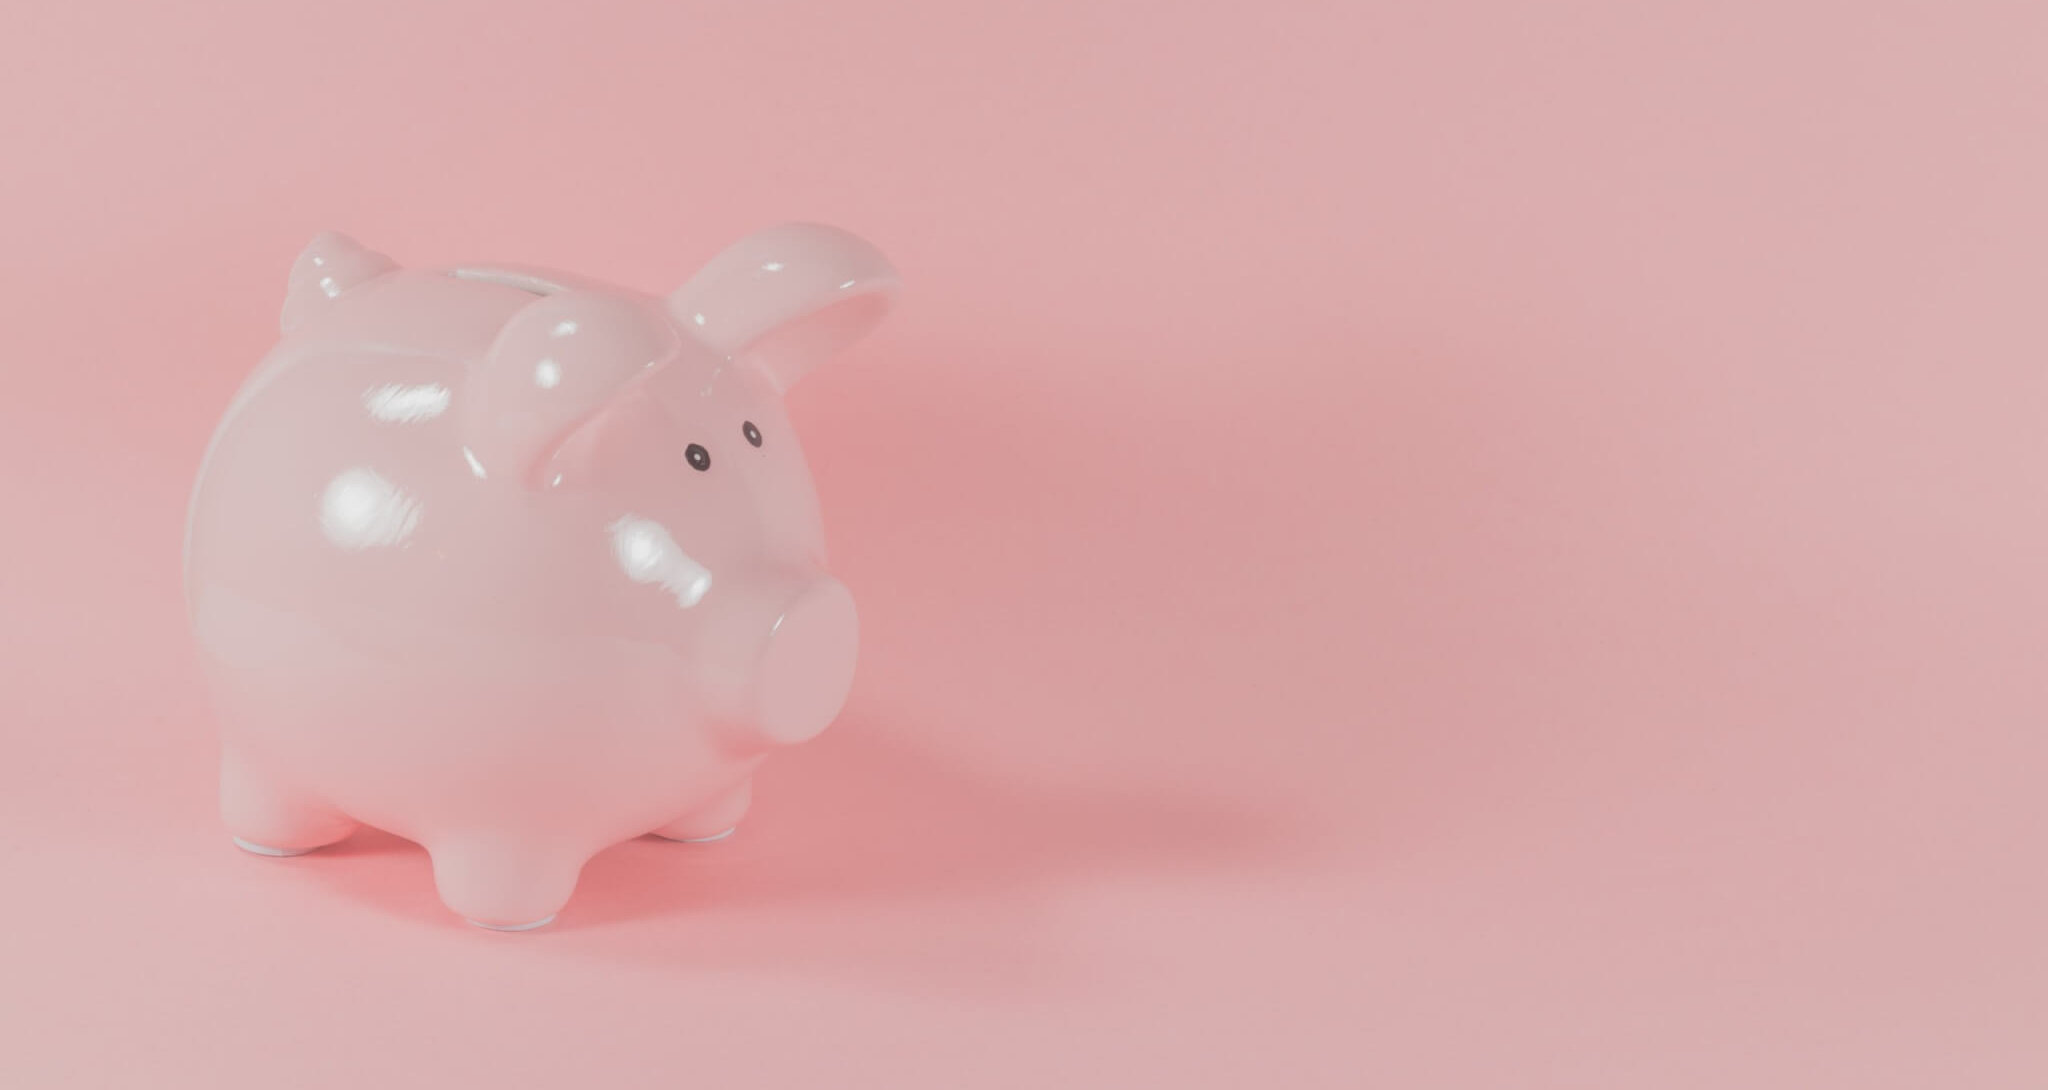 A photo of a pink piggy bank on a pink background